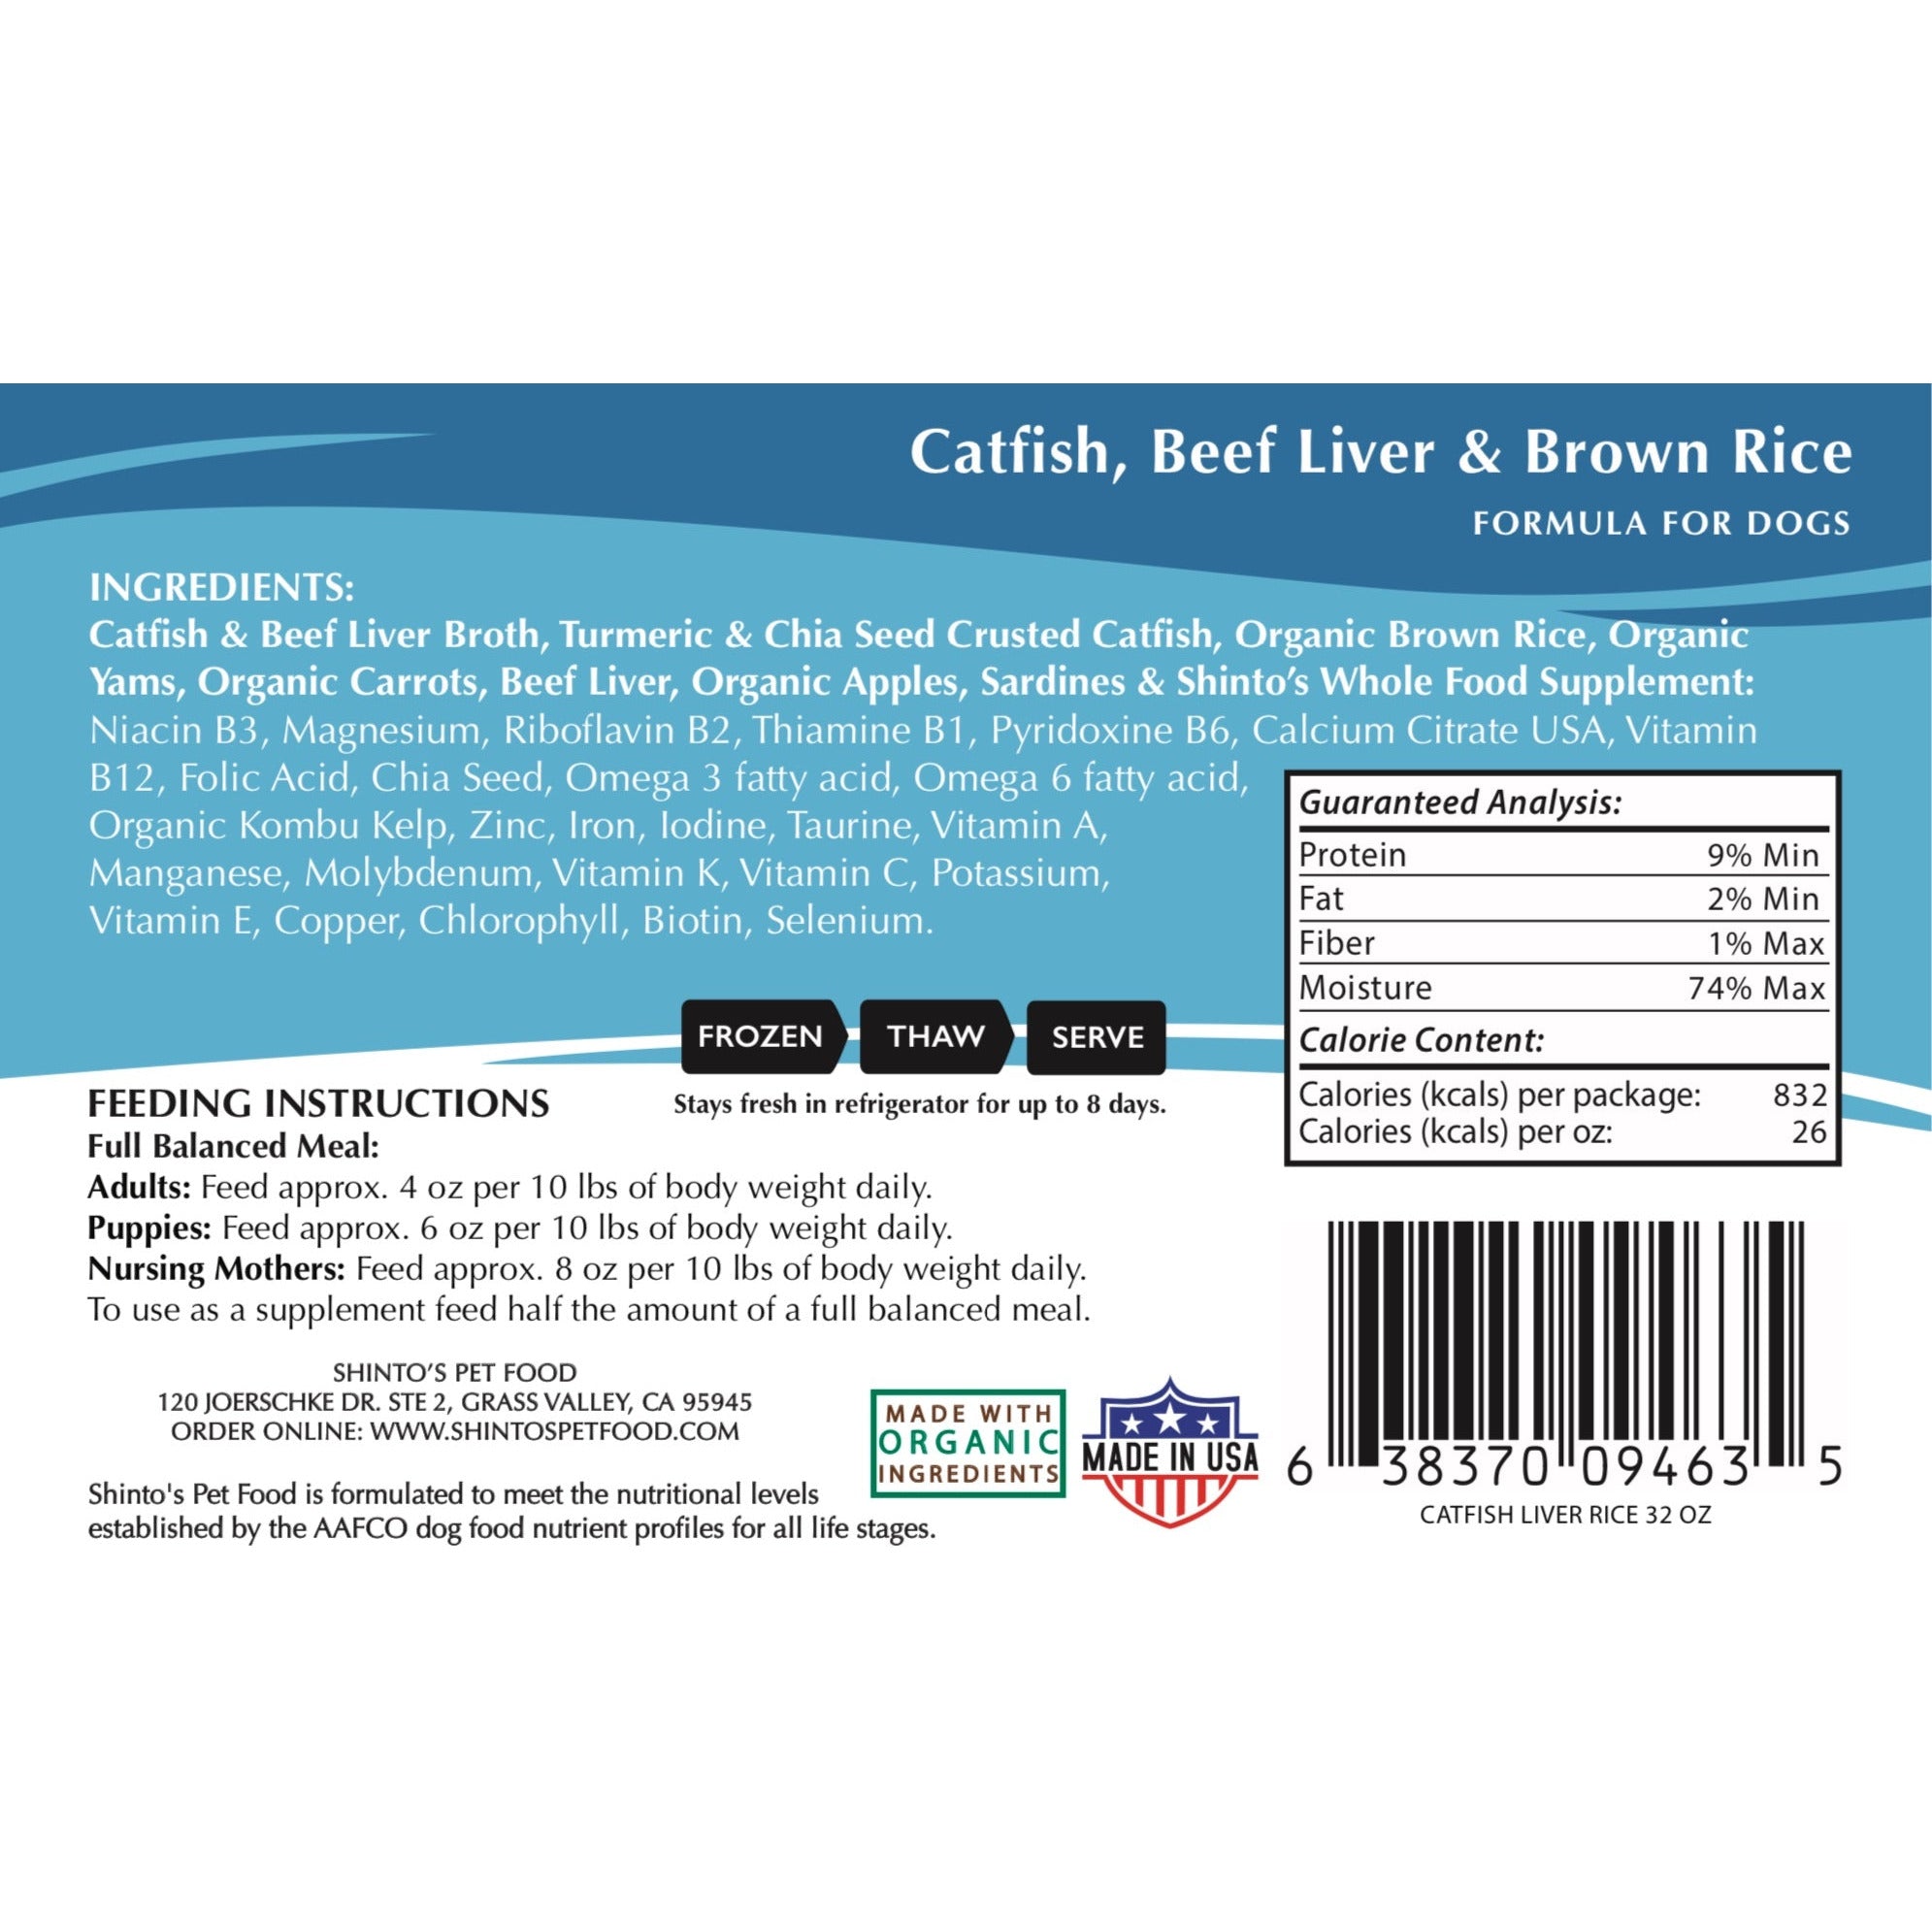 Catfish, Beef Liver & Brown Rice Formula - for Dogs